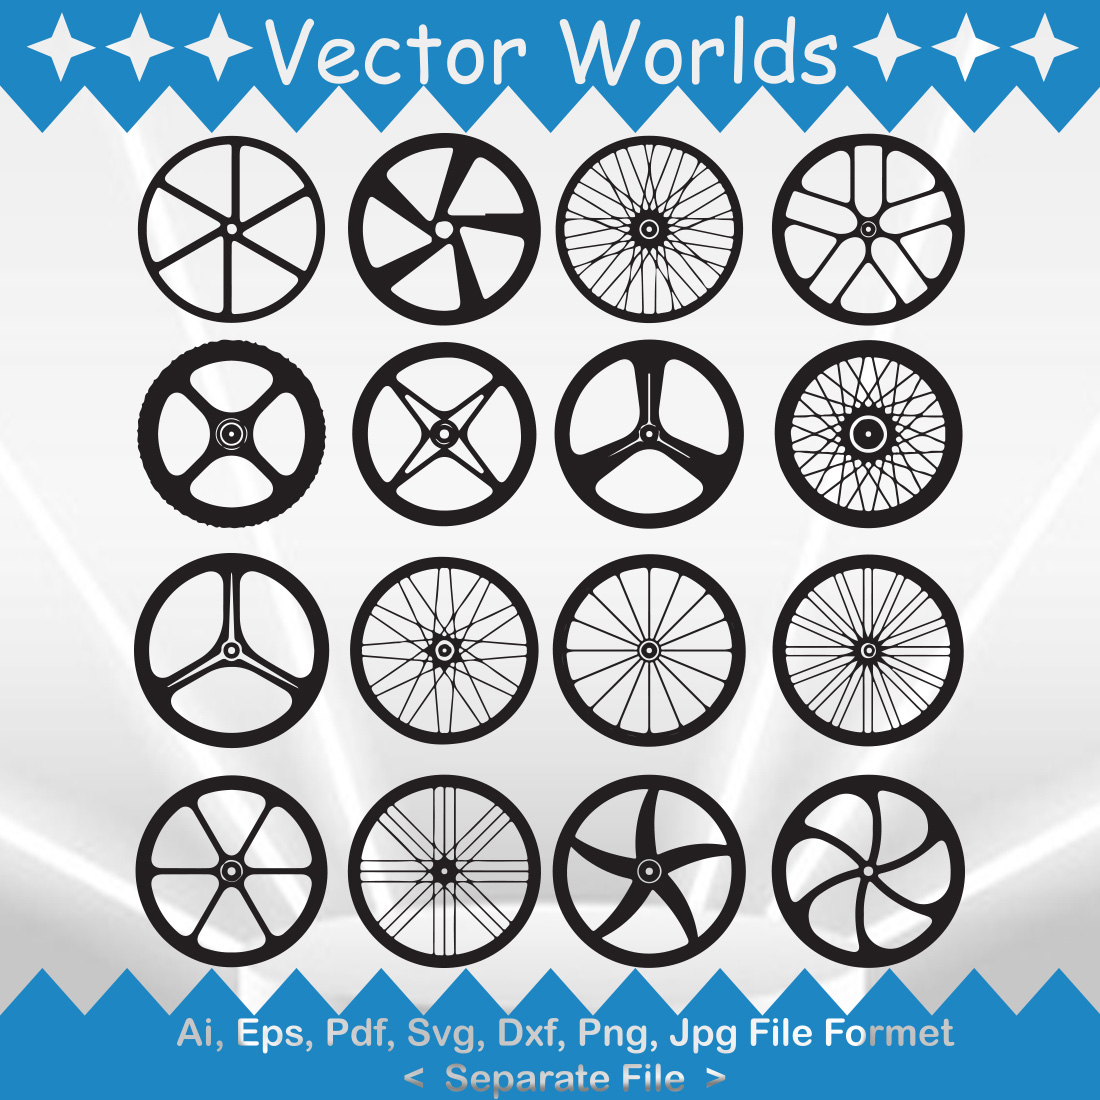 A selection of unique images of black bicycle wheels.